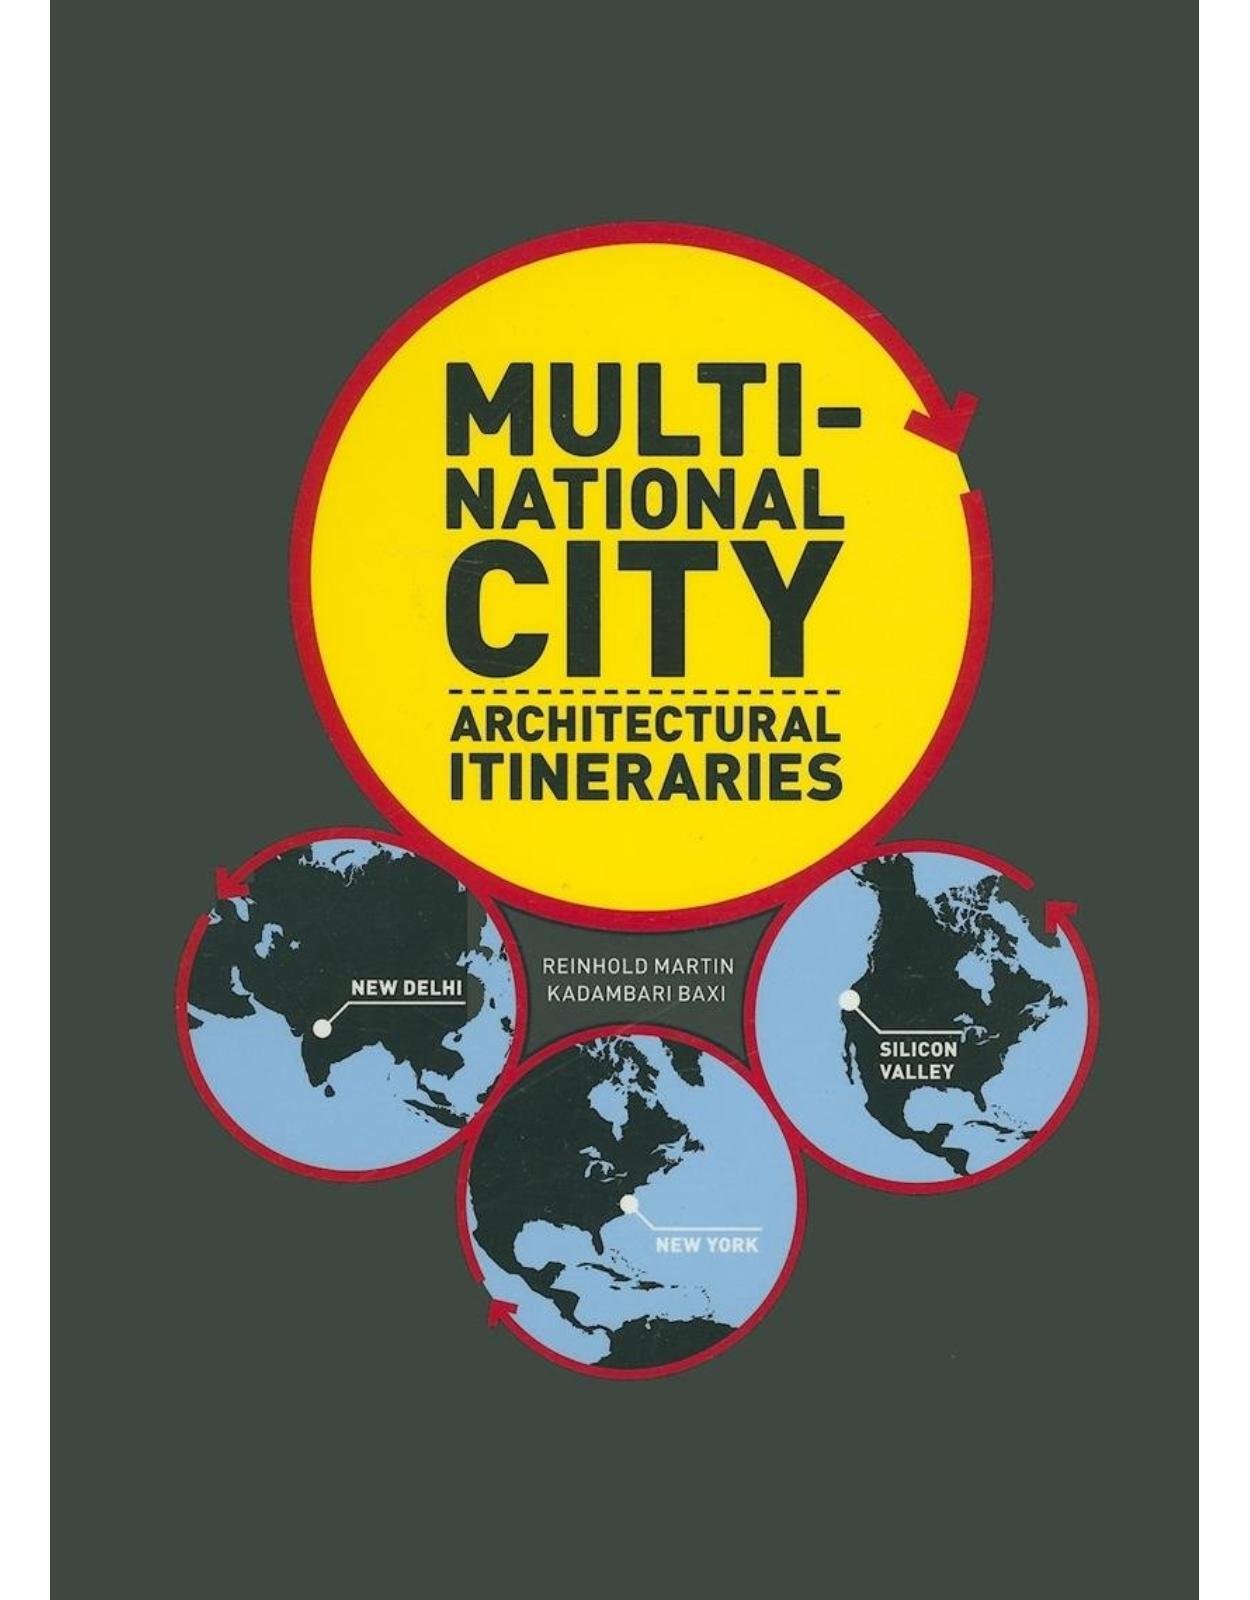 Multi-national City: Architectural Itineraries